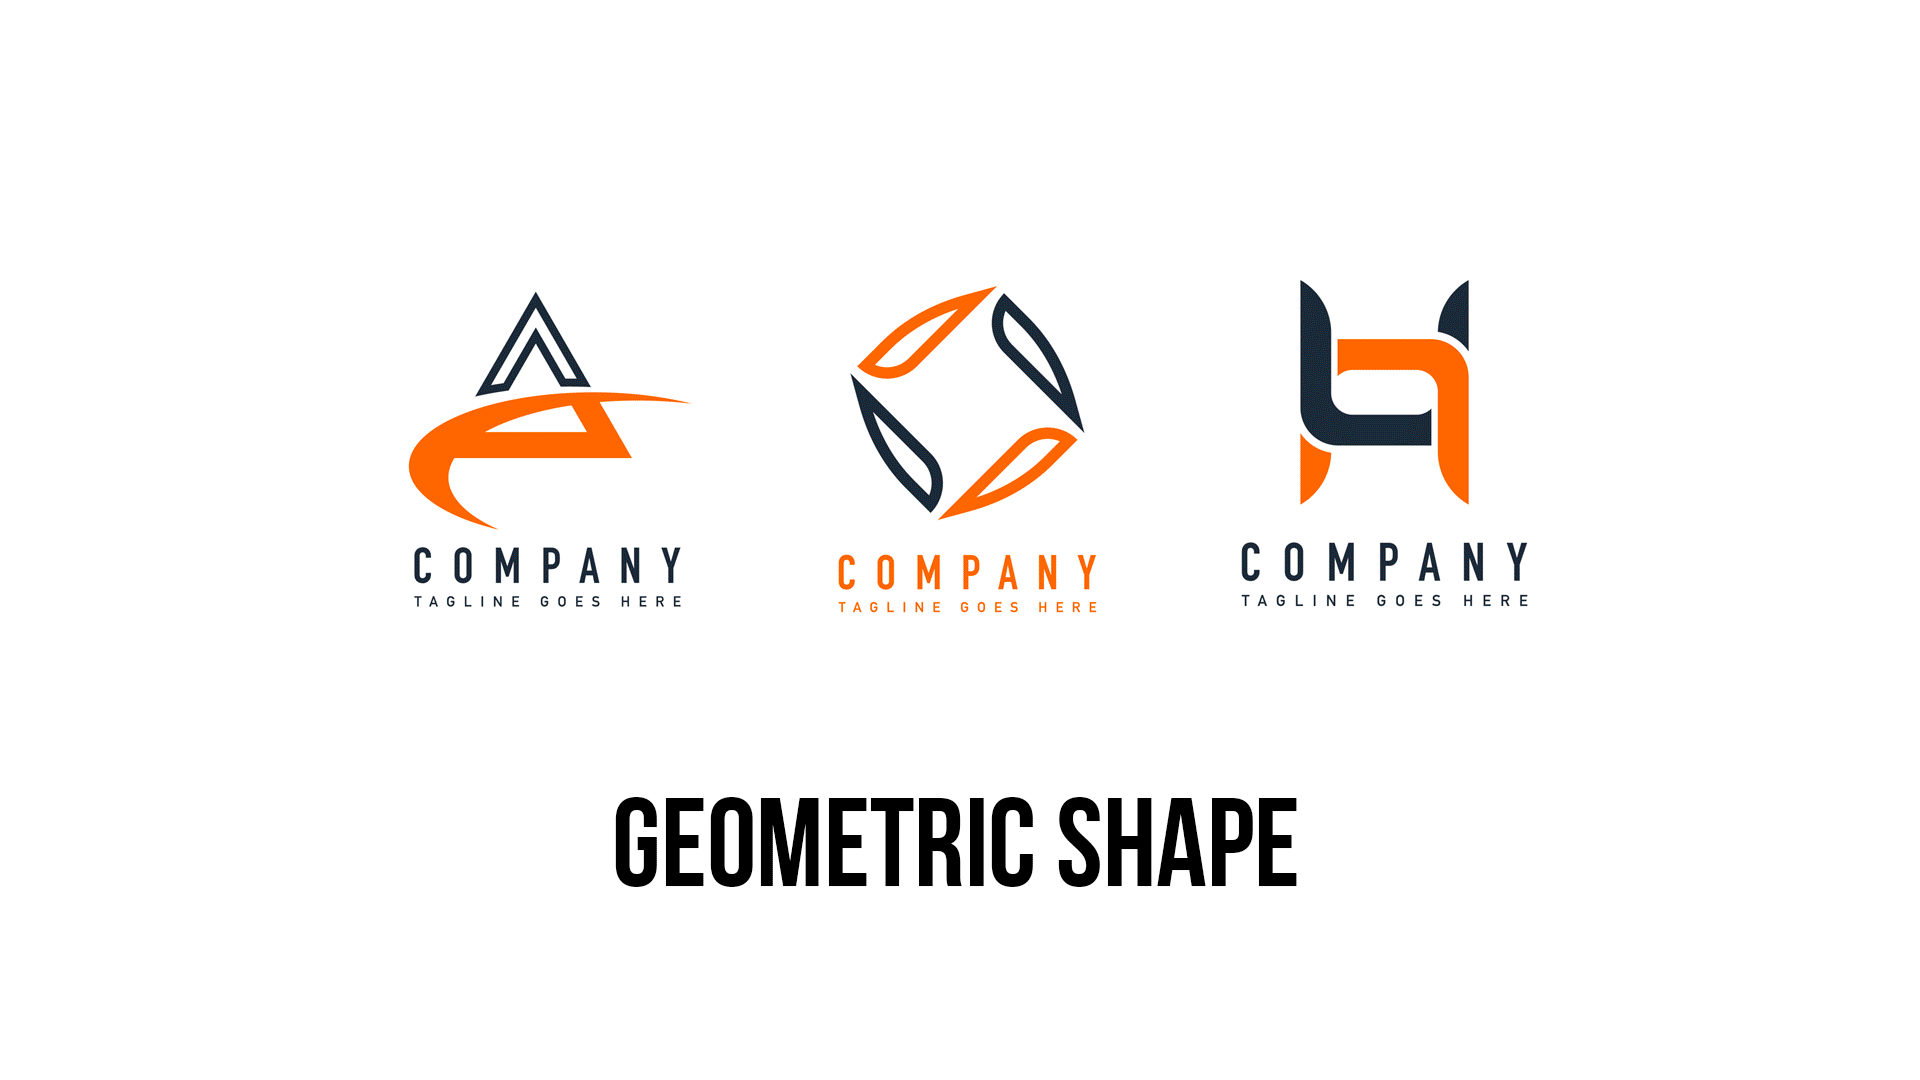 Logo Design Trends to Look for in 2019